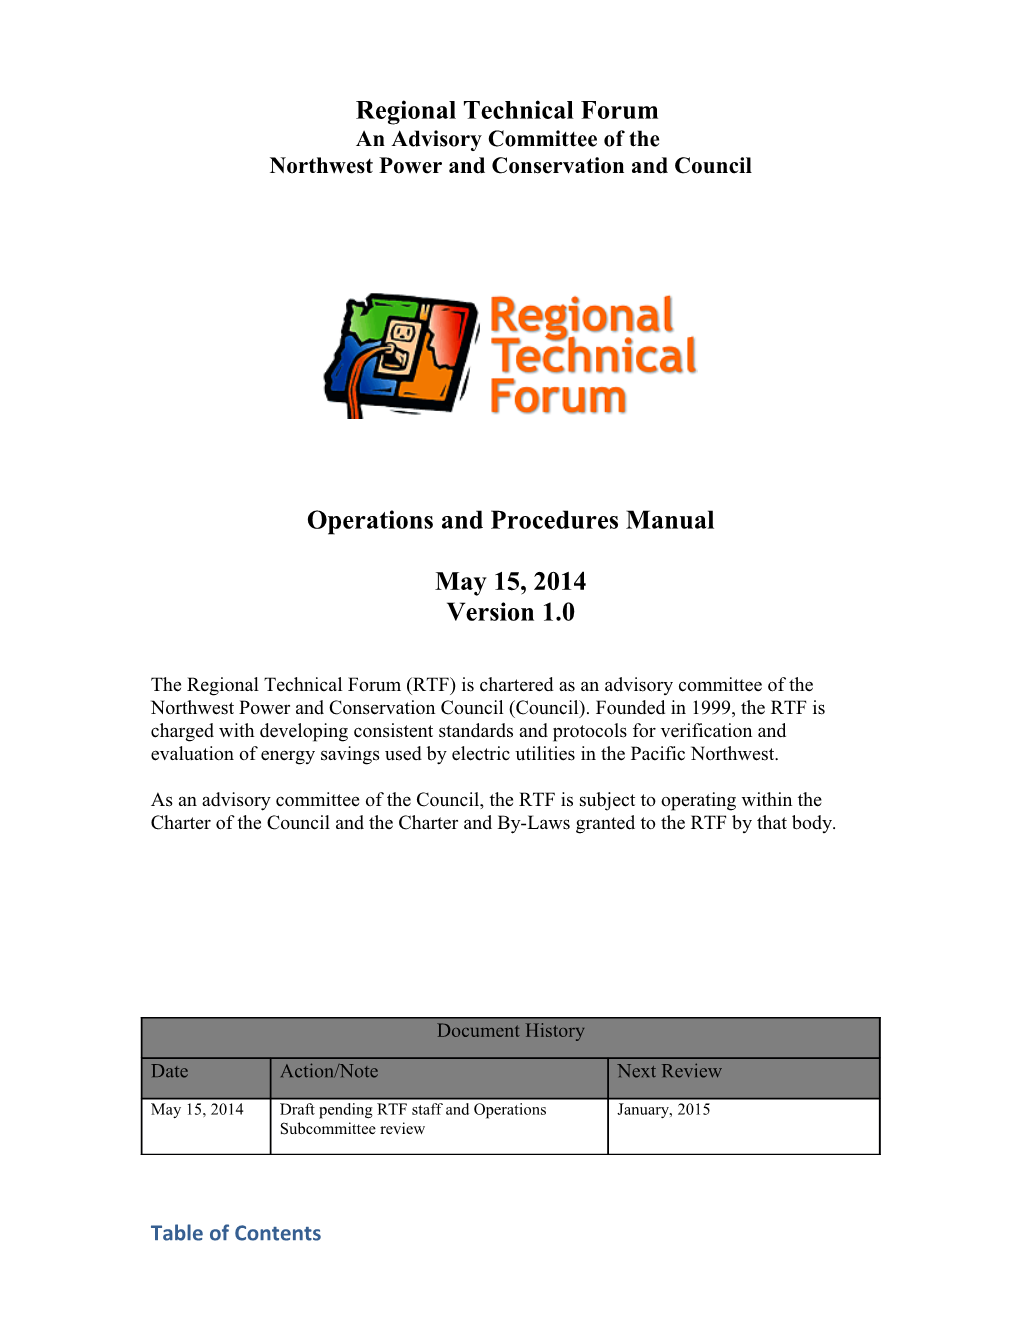 RTF Operations And Procedures Manual